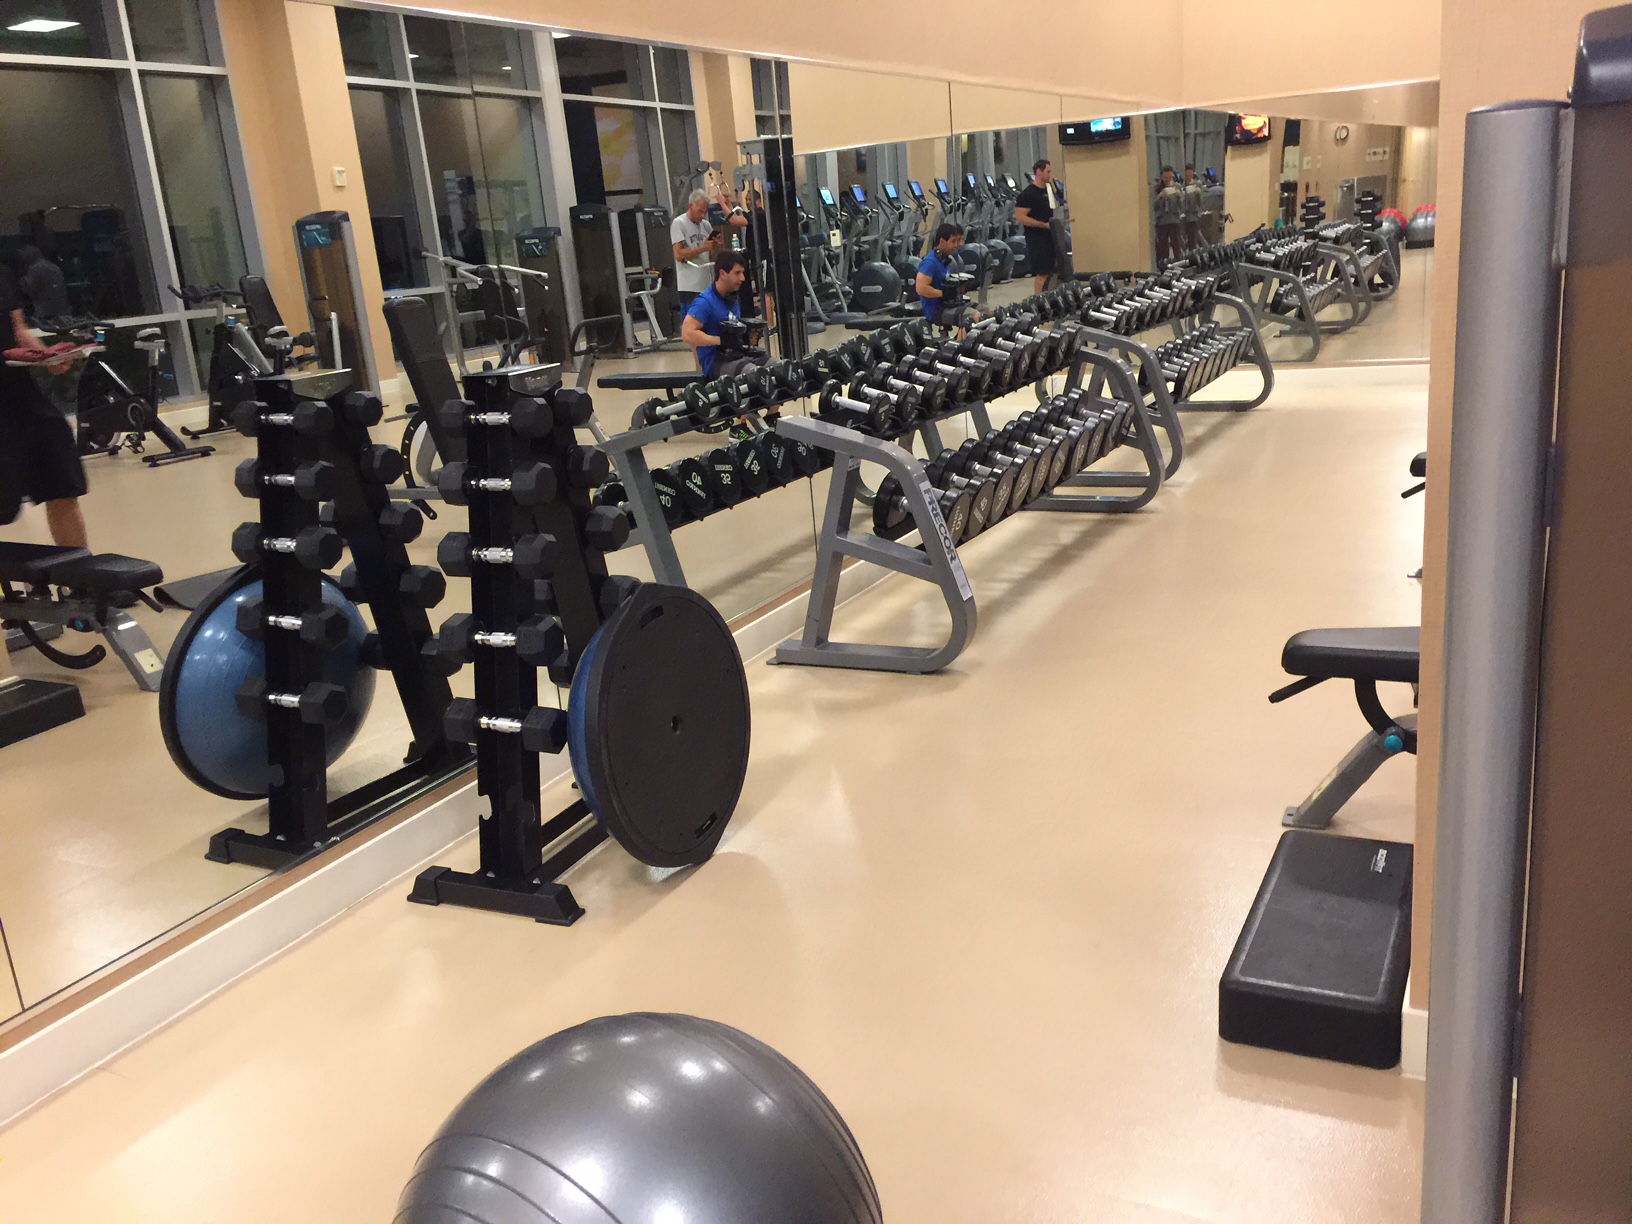 Hilton Orlando fitness center | hotel gyms Orlando | best hotels in Orlando florida | international drive hotels | staying fit while traveling | acupful of carters 